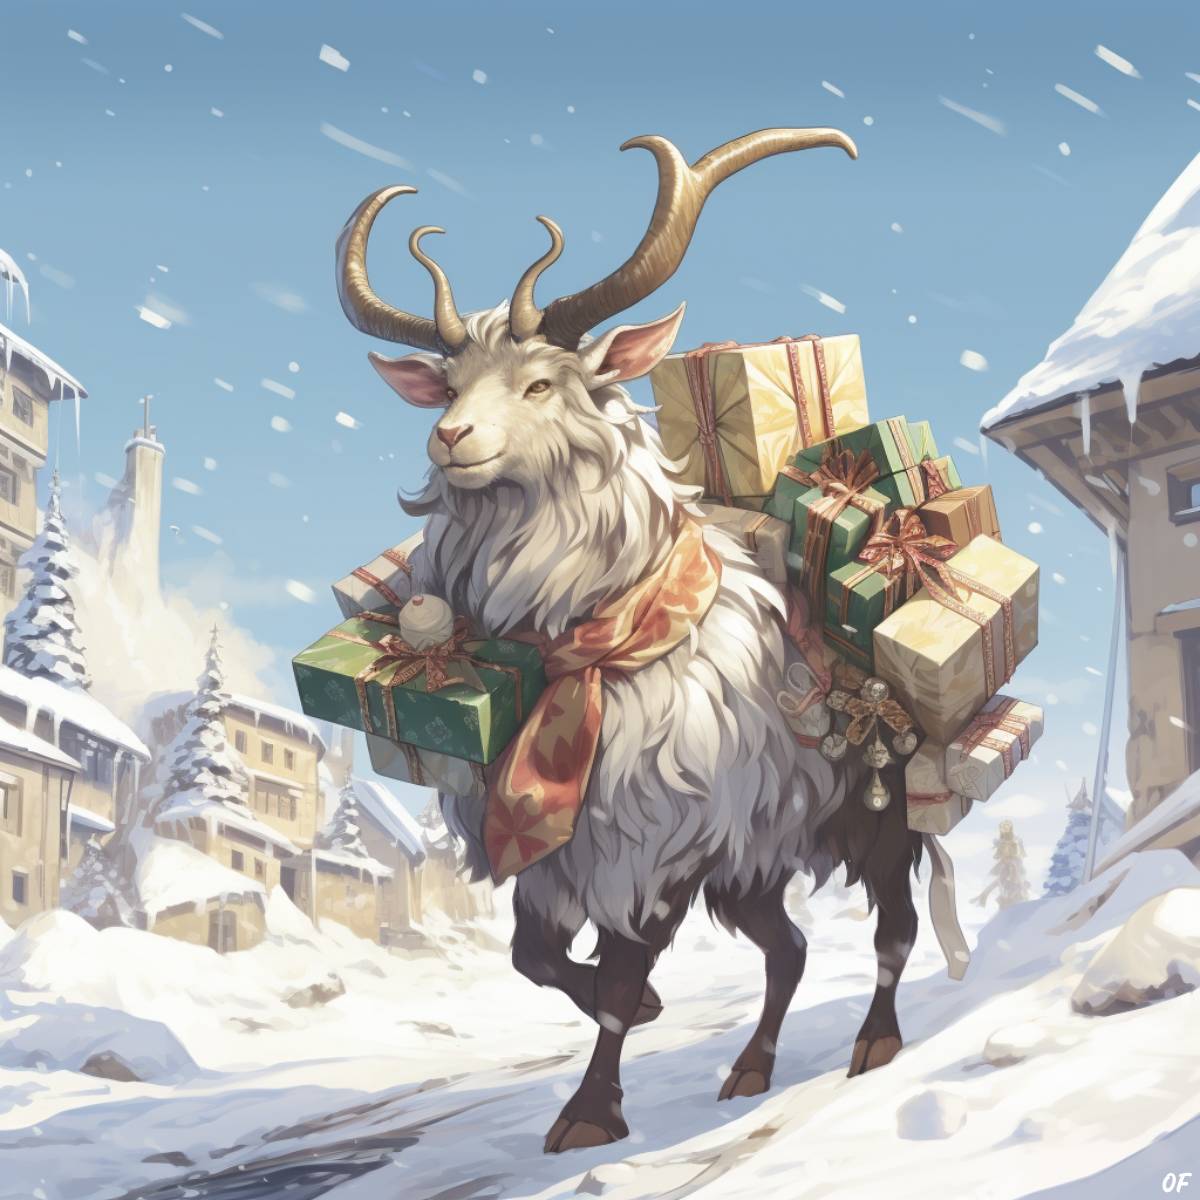 The Yule Goat.